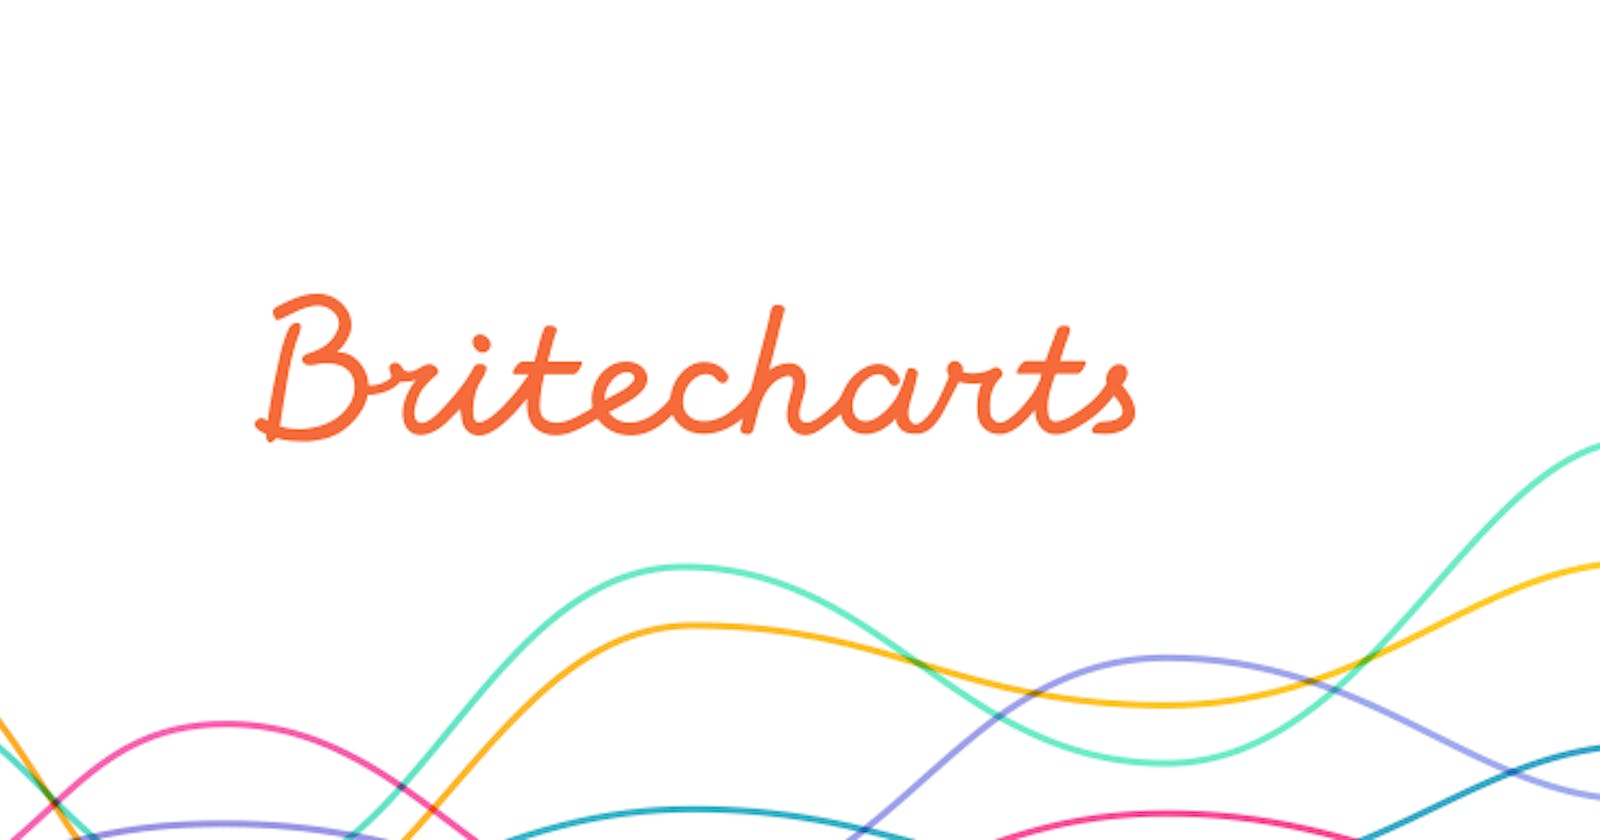 Britecharts, a D3.js based charting library of reusable components